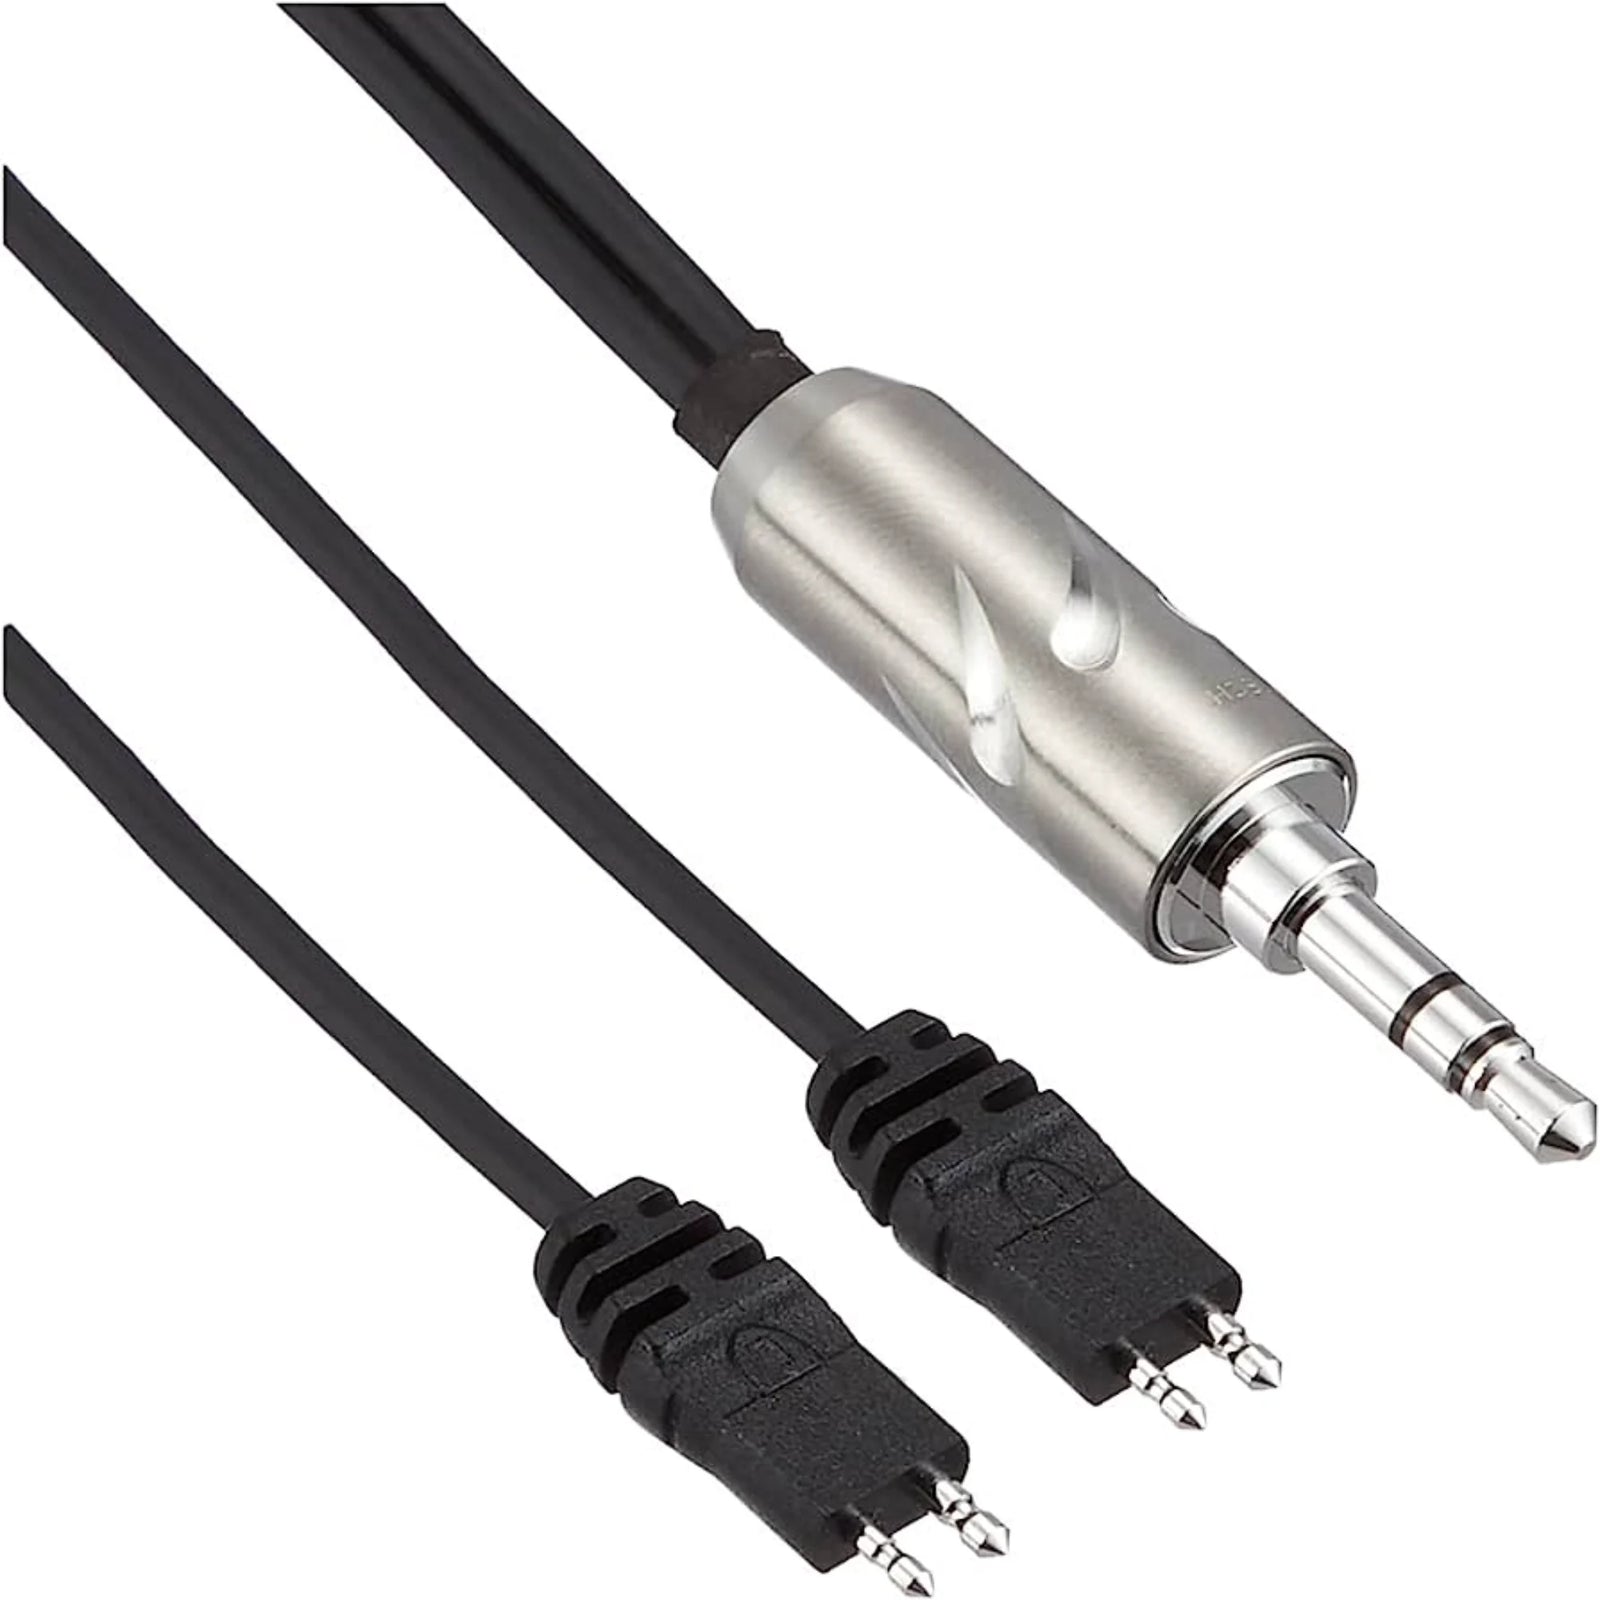 ALPHA DESIGN LABS HEADPHONE CABLE iHP-35S-1.3m Headphone Cable 6.3mm stereo to 2 Pin connector for Sennheiser (1.3M) iHP-35S-3.0m Headphone Cable 6.3mm stereo to 2 Pin connector for Sennheiser (3.0M) iHP-35S-XLR-1.3m Headphone Cable XLR to 2 Pin connector for Sennheiser Headphone Available at Vinyl Sound